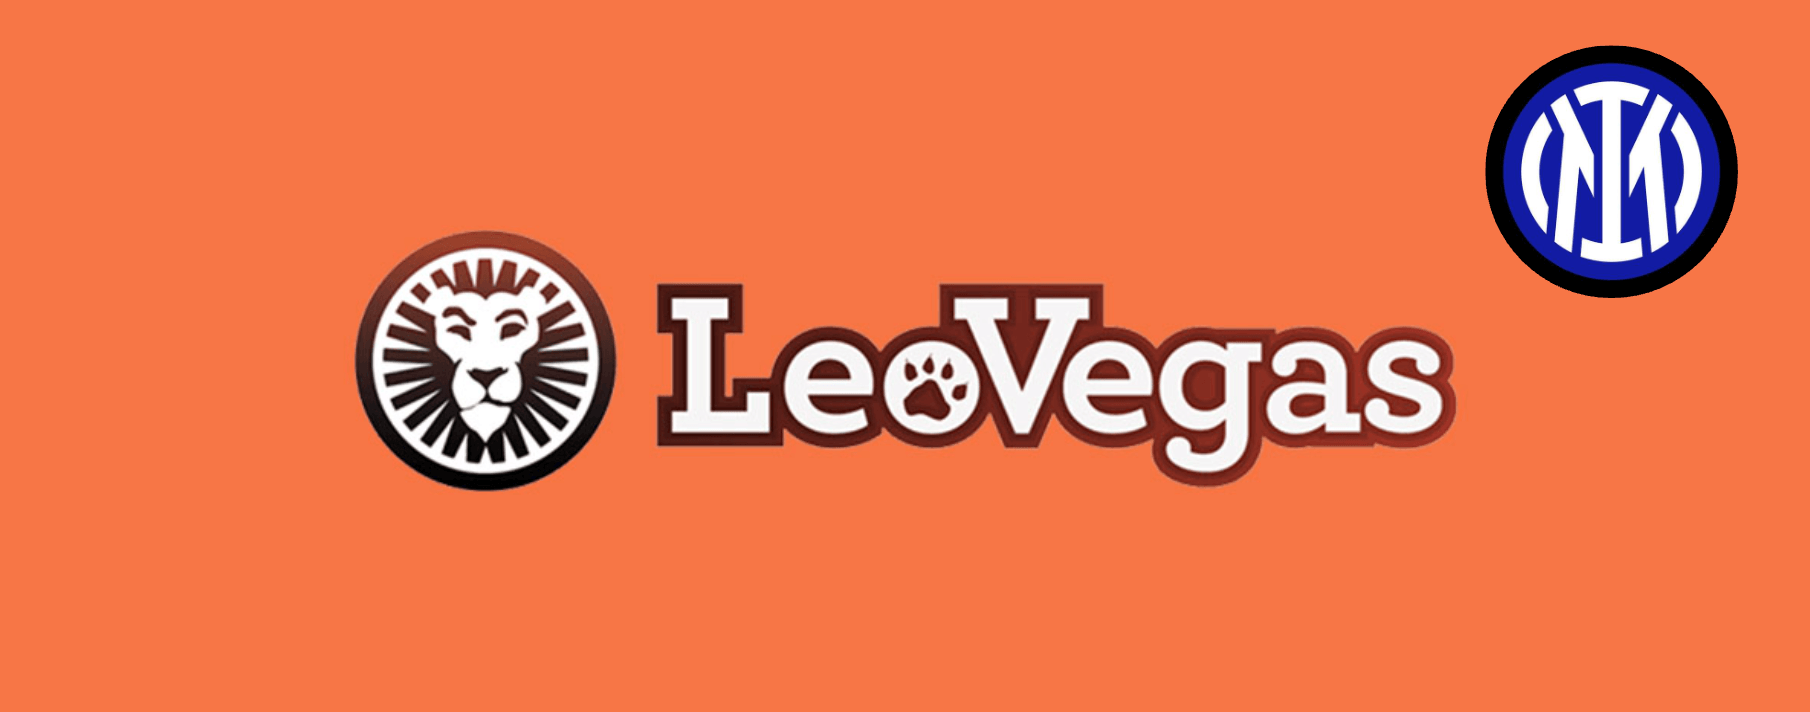 LeoVegas launches global partnership with Inter Milan